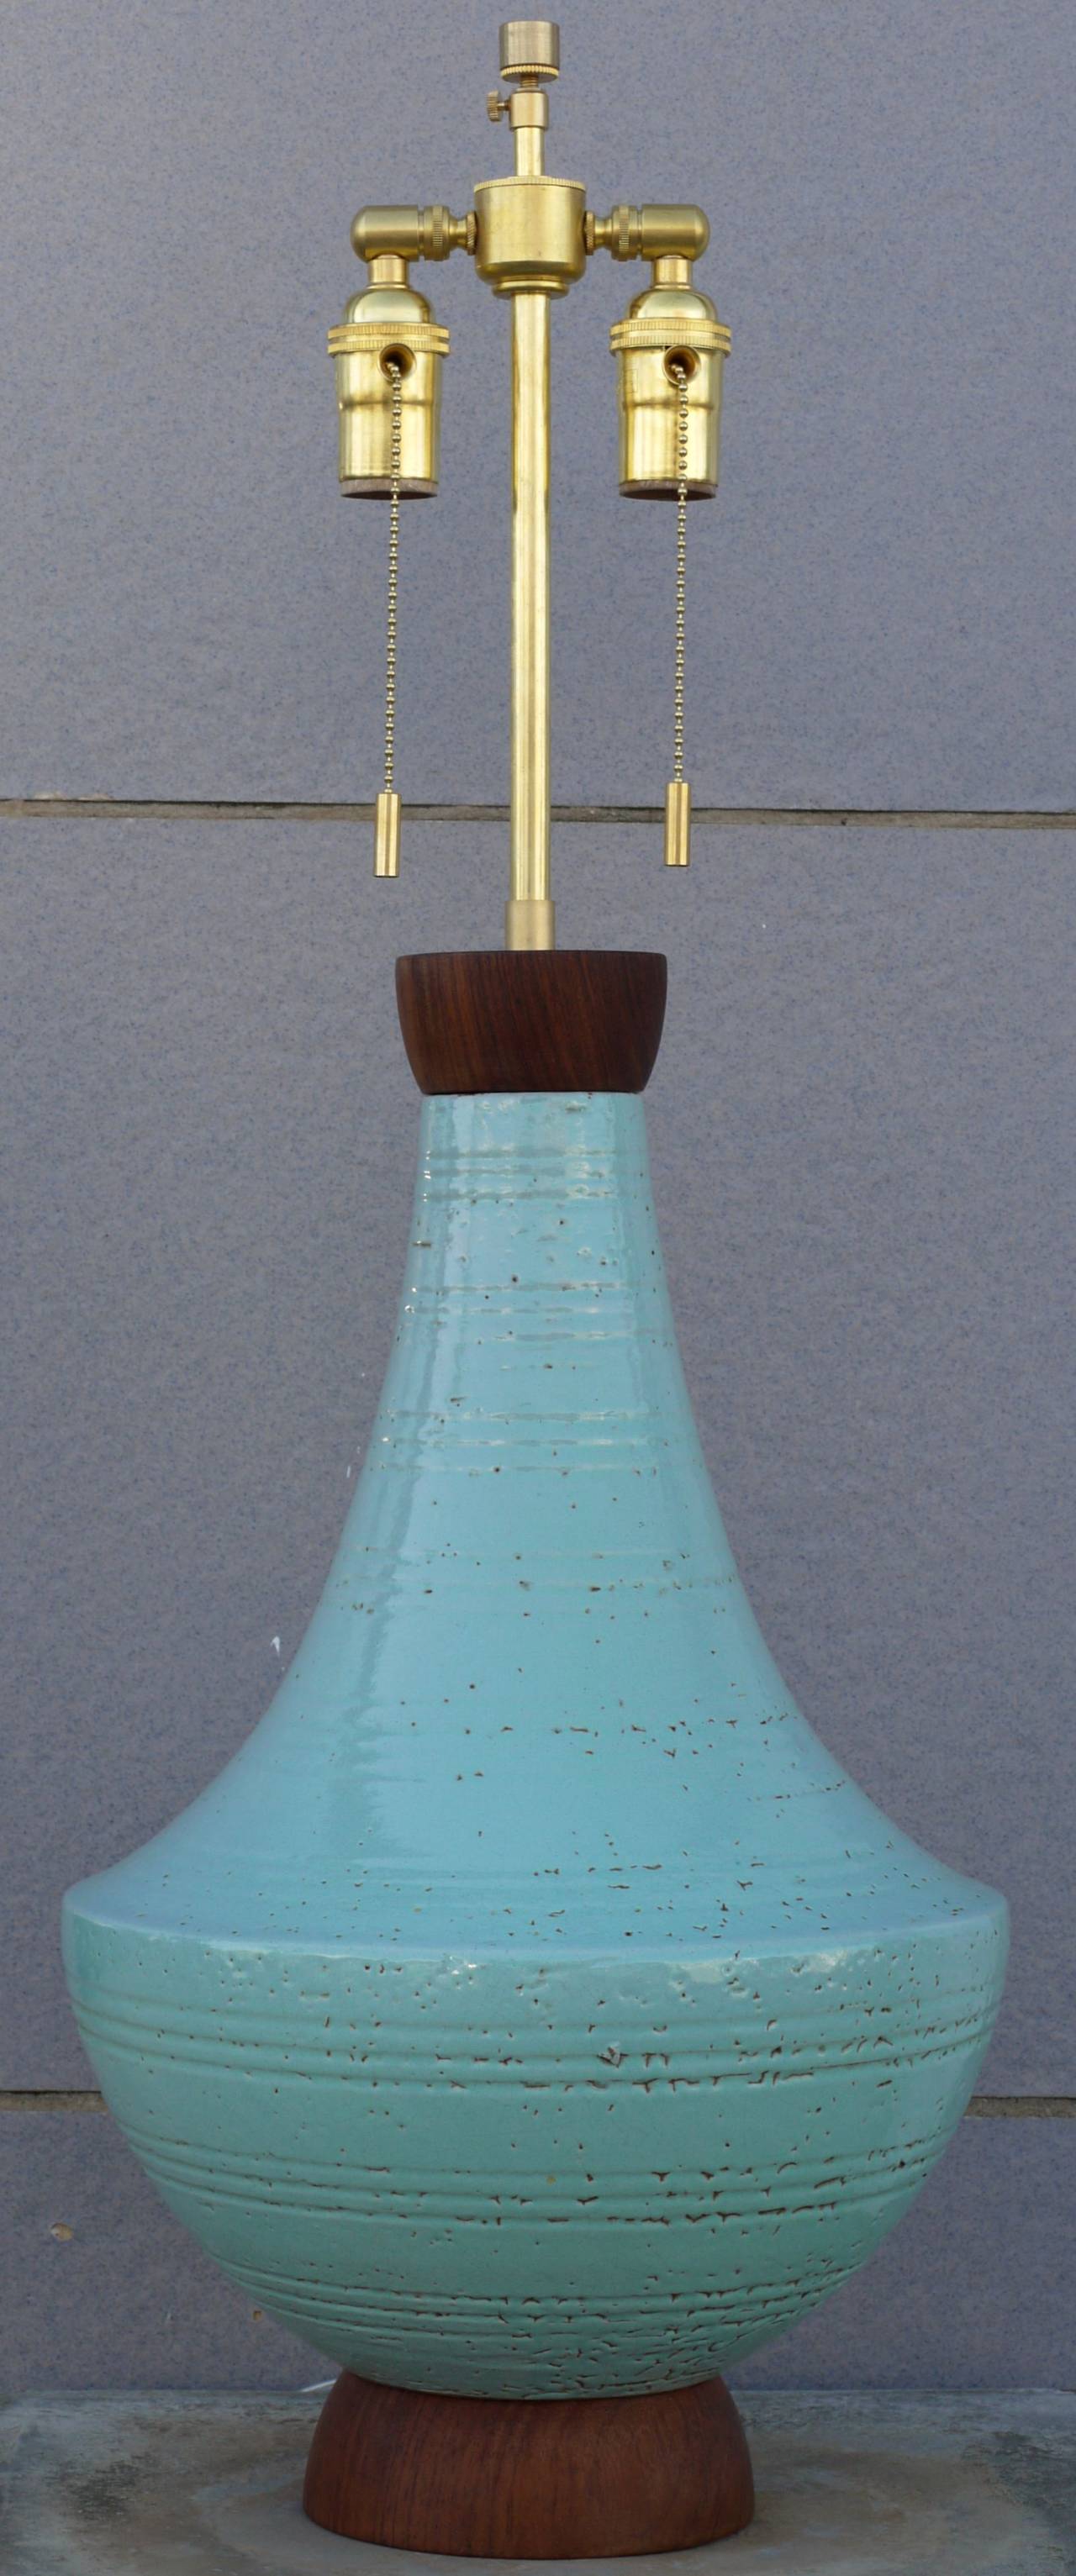 Sculptural table lamp with a wonderful robins egg blue light crackled glaze with original rosewood cap and base.